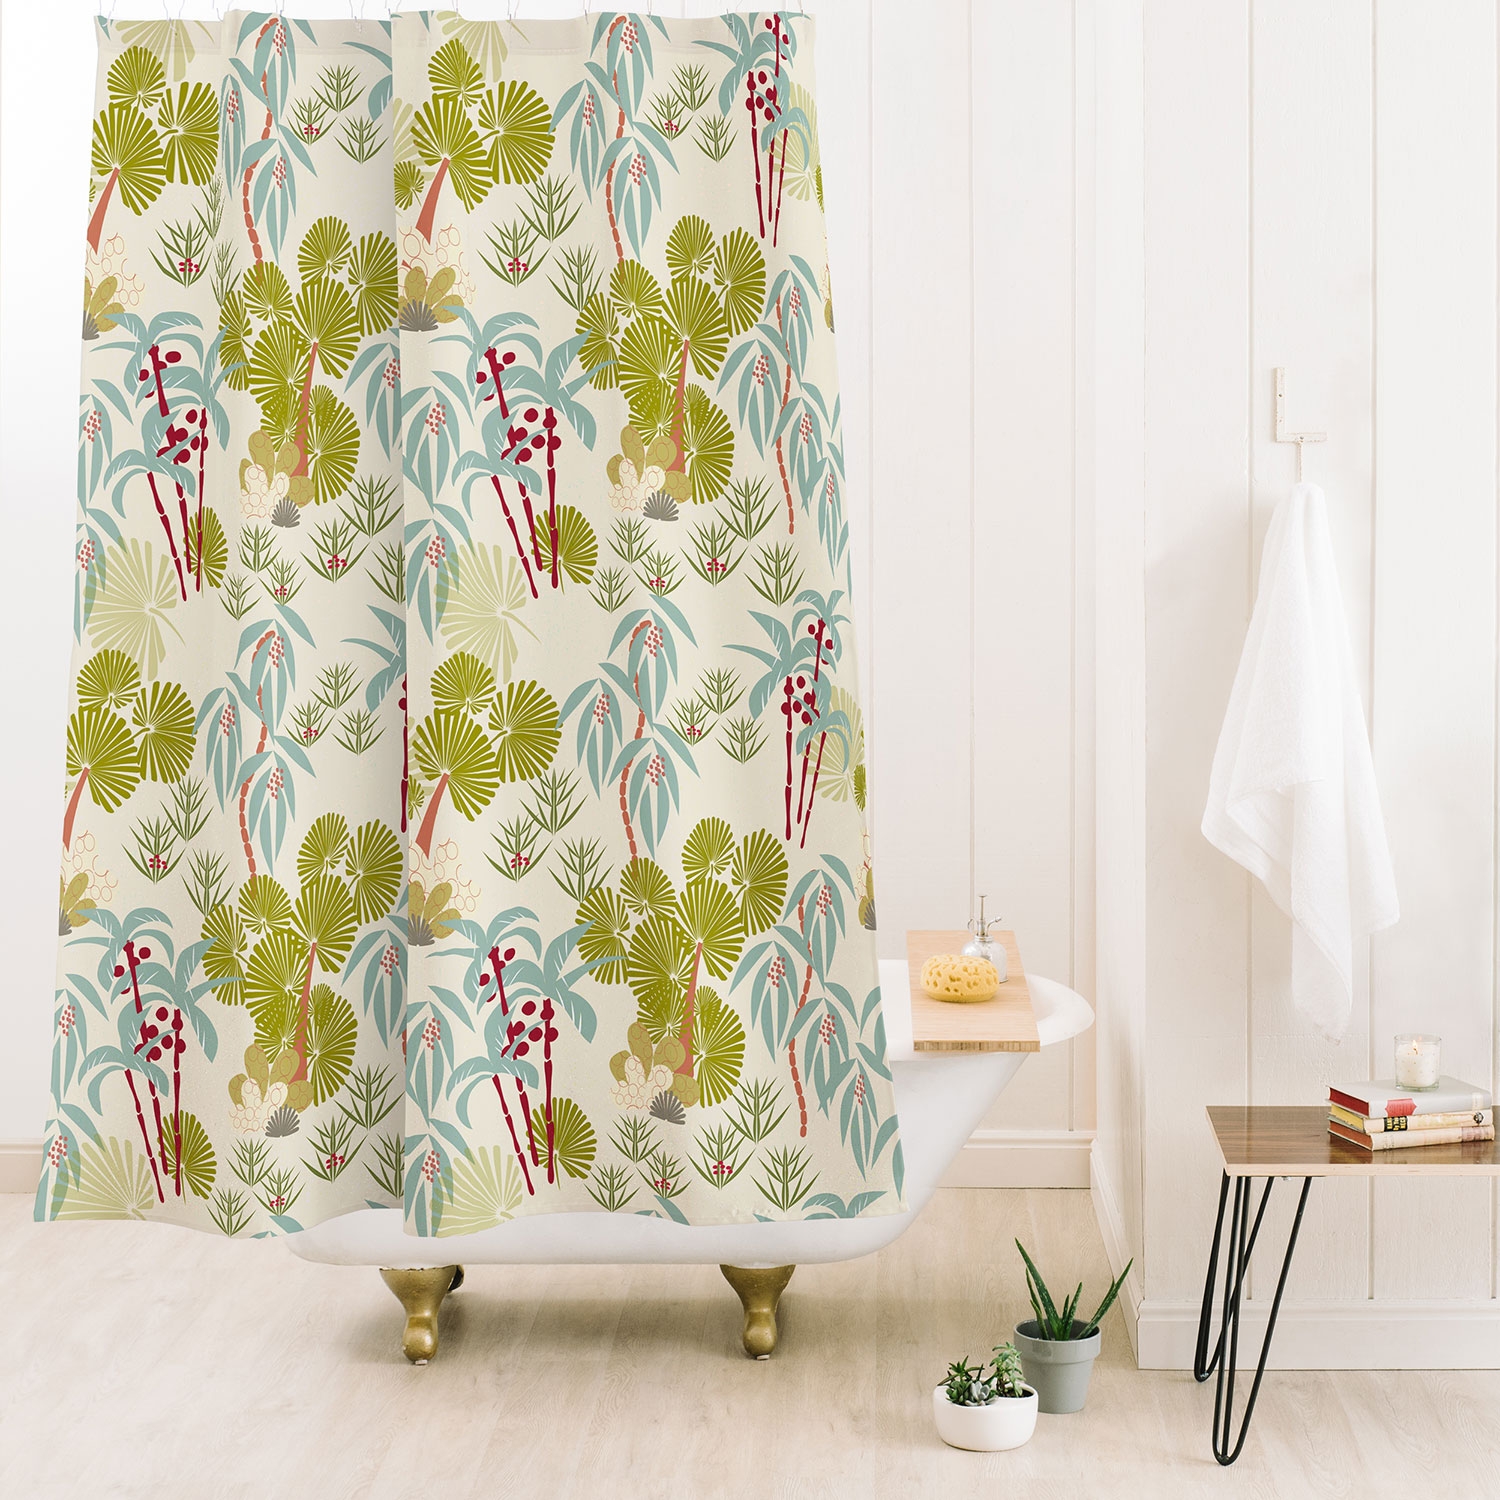 Tropical Spring by Mirimo - Shower Curtain Standard 71" x 74" with Liner and Rings - Image 1